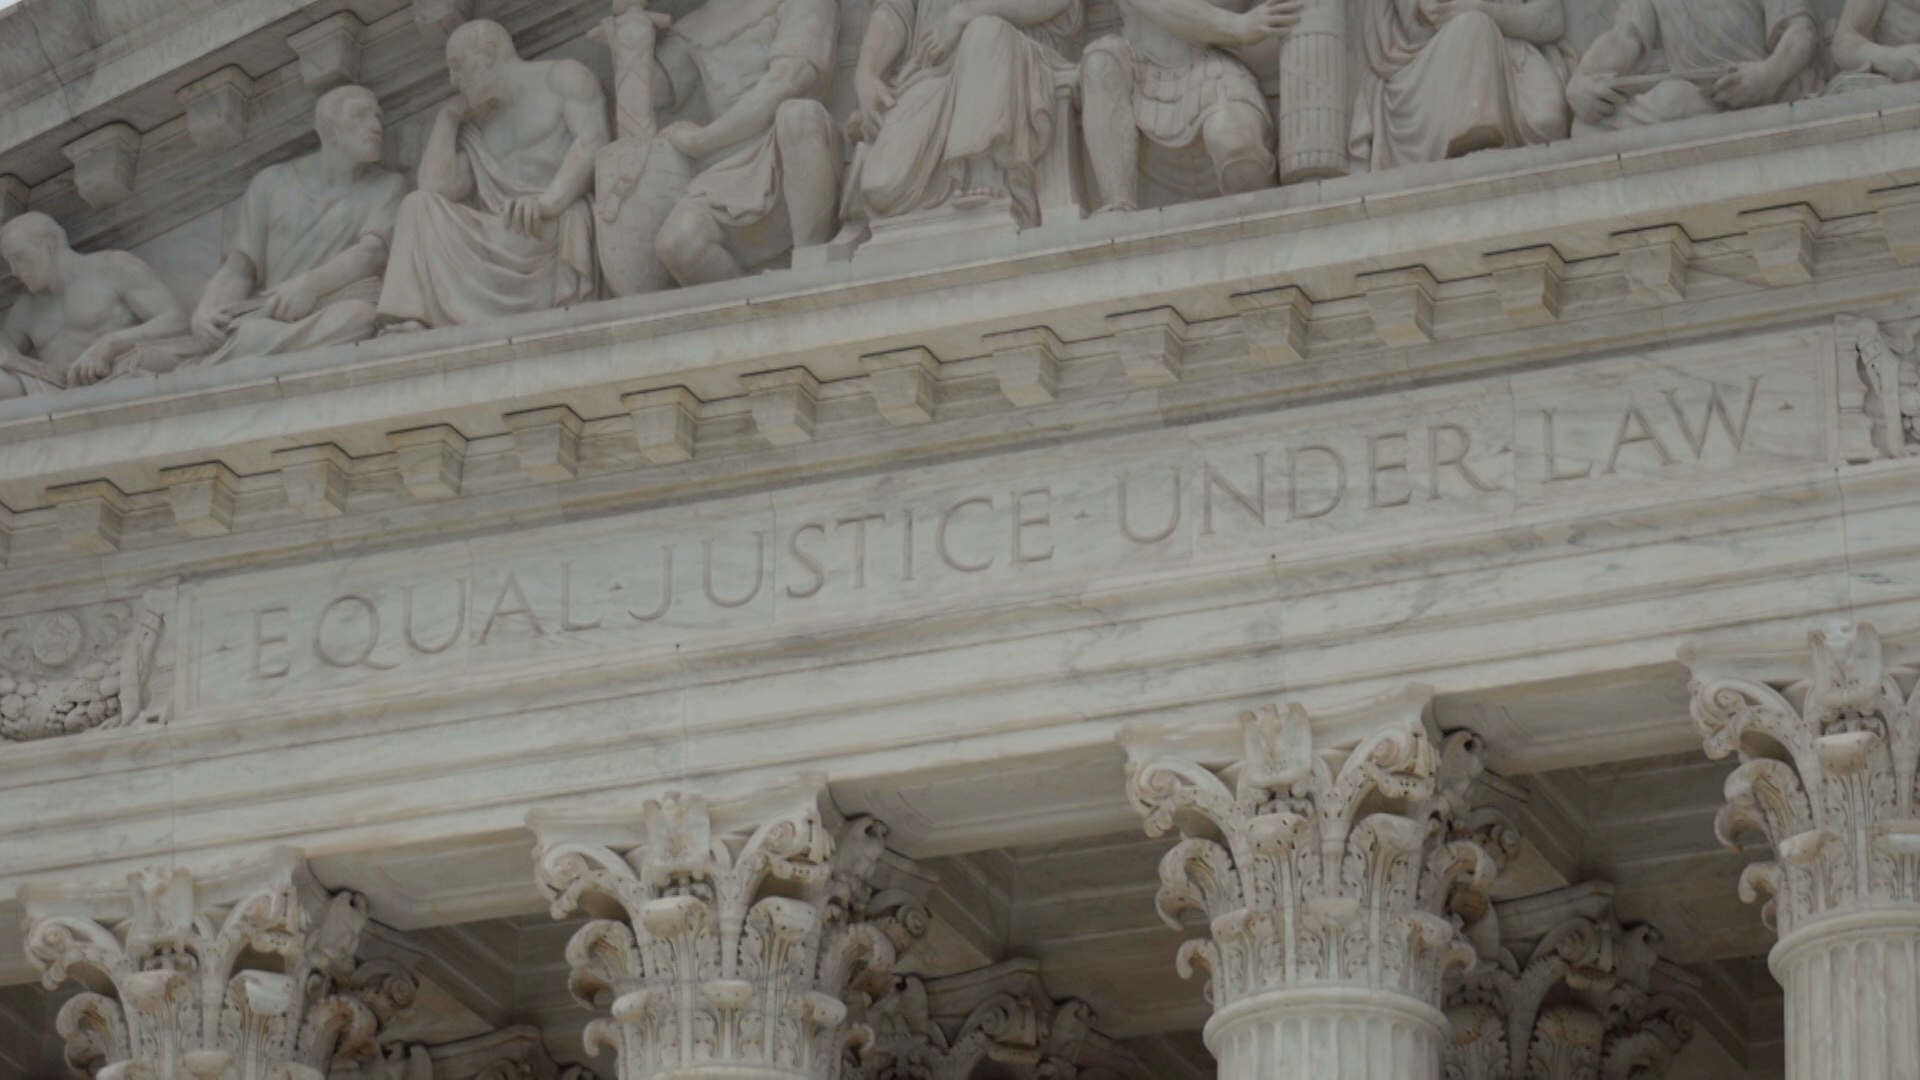 A carved marble façade atop a row of columns reads "Equal Justice Under Law" with Classical-style statues arrayed above.